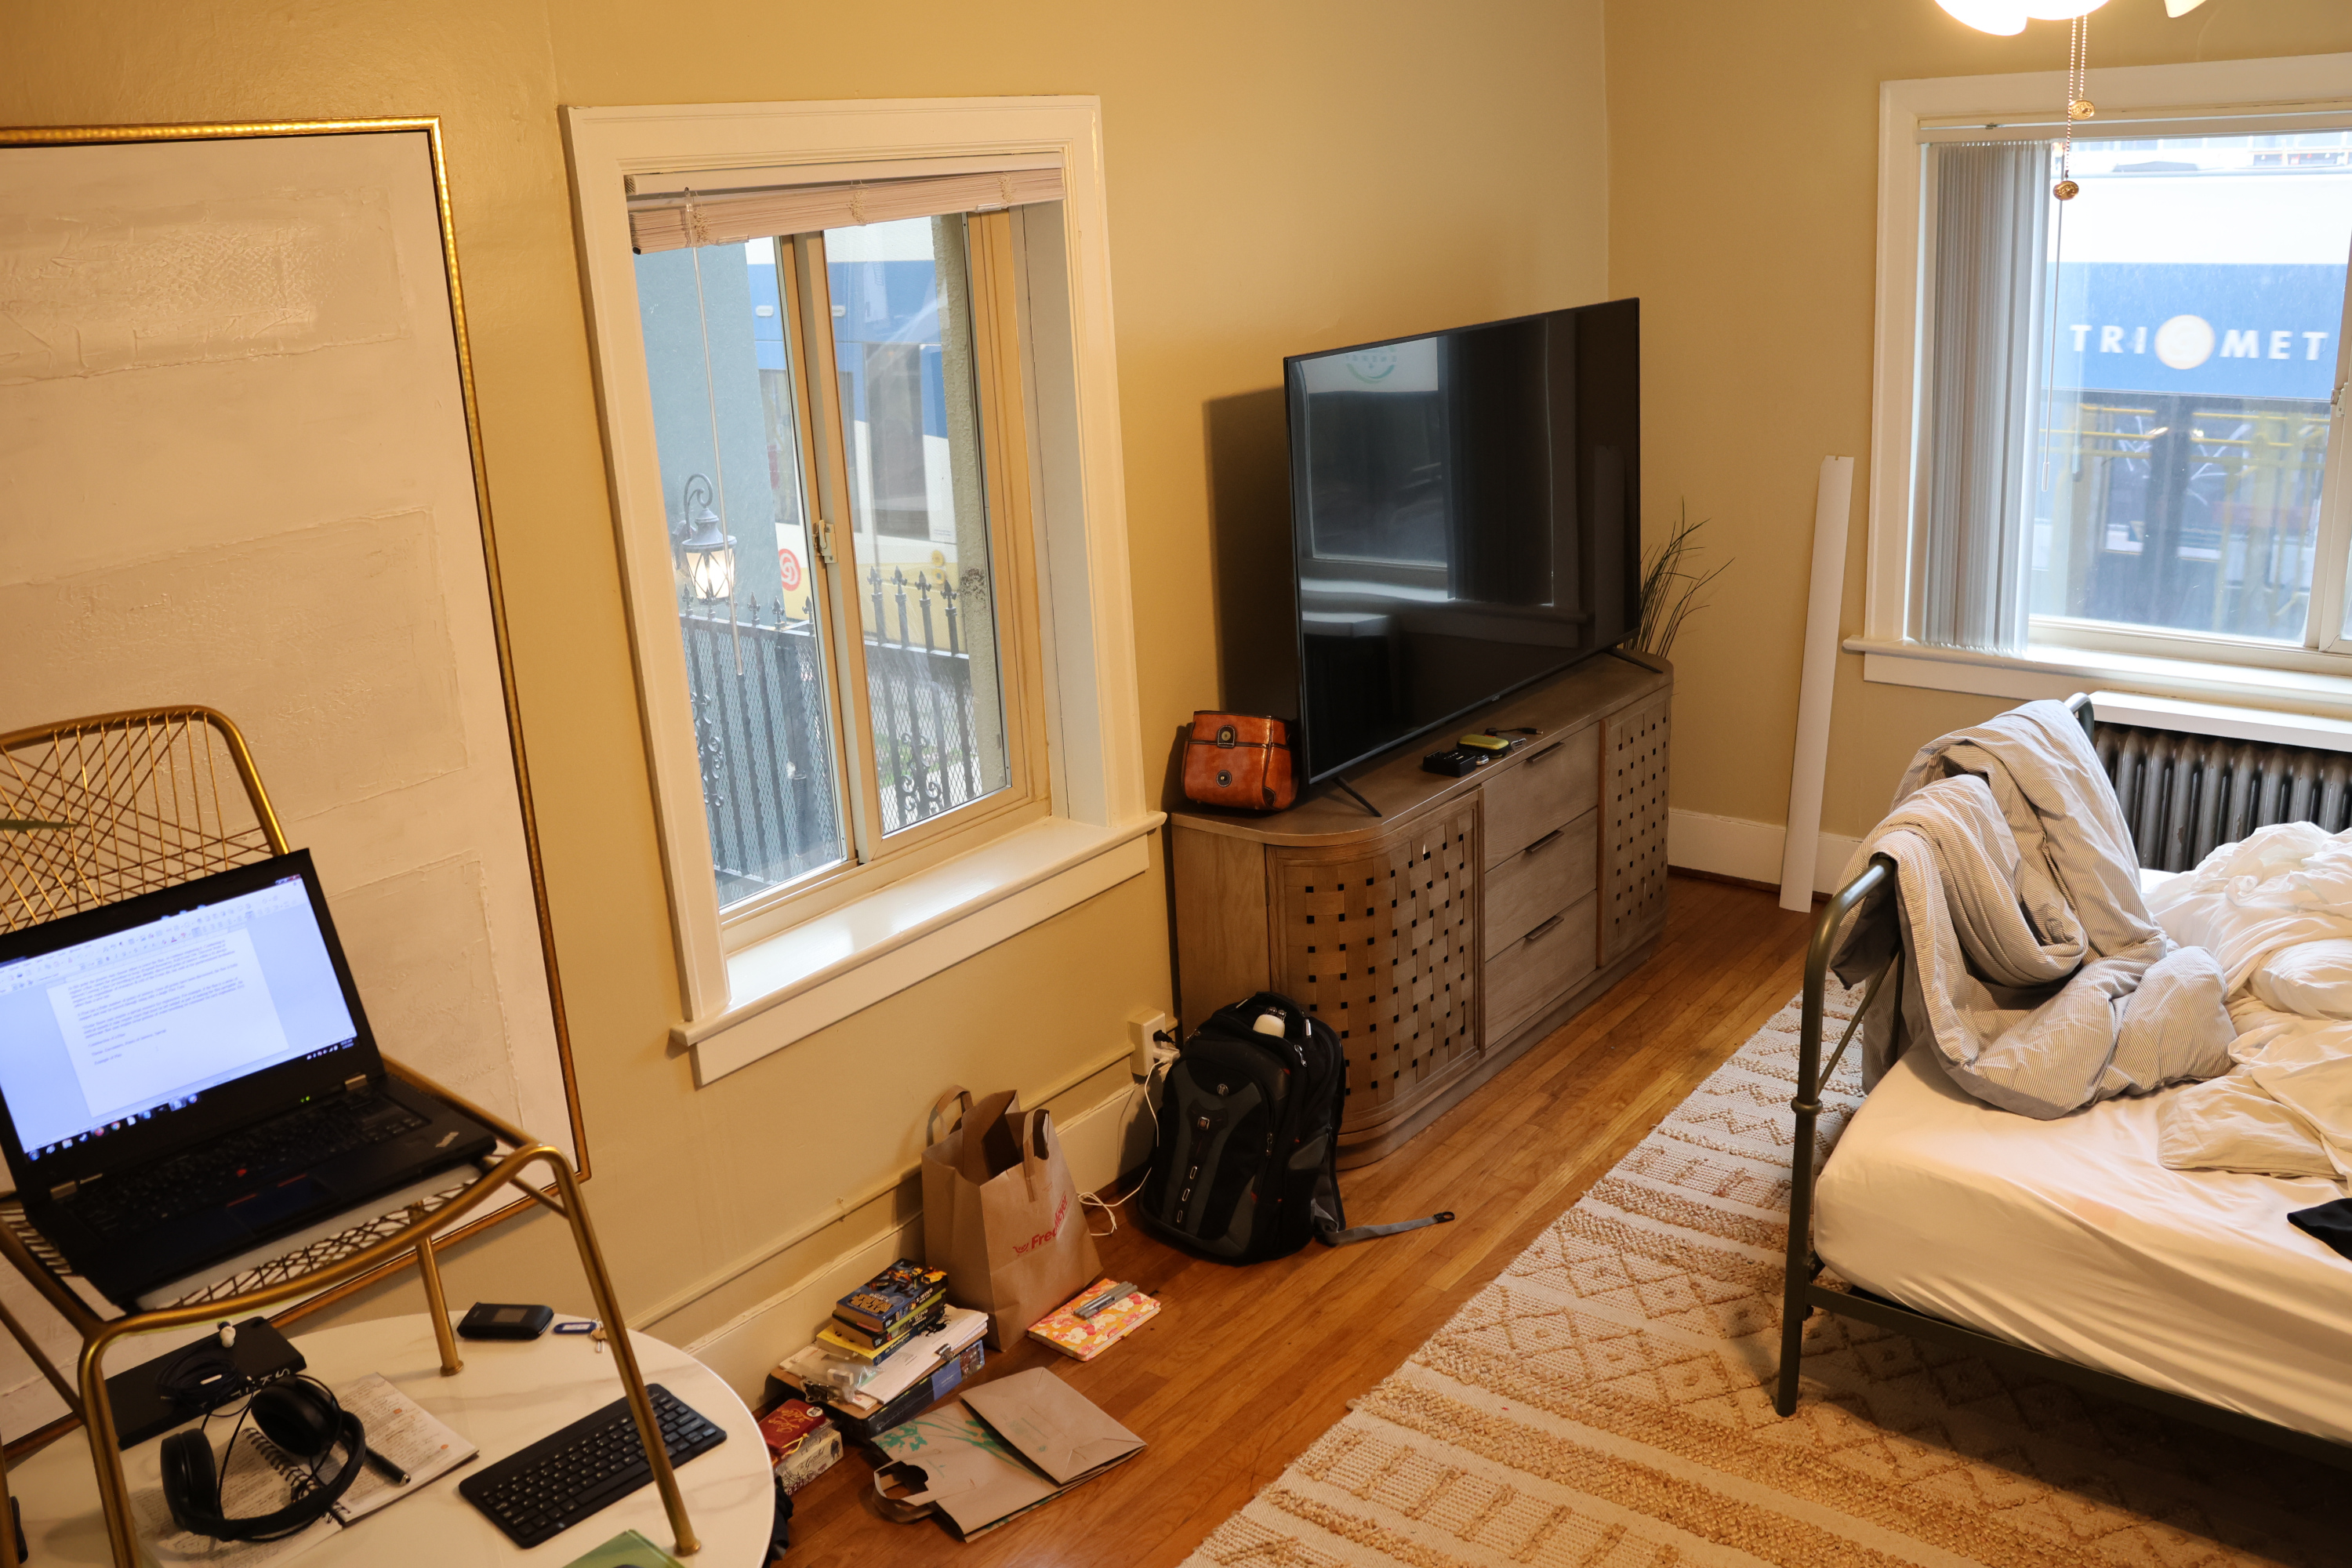 Another angle of the same small apartment in photo 1. The messy bed is still in frame, but you can see a cabinet with a TV on it, several piles of notebooks and backpacks and clothes resting against the wall, and a circular table. There's a chair on top of the table, and a laptop on top of the chair.